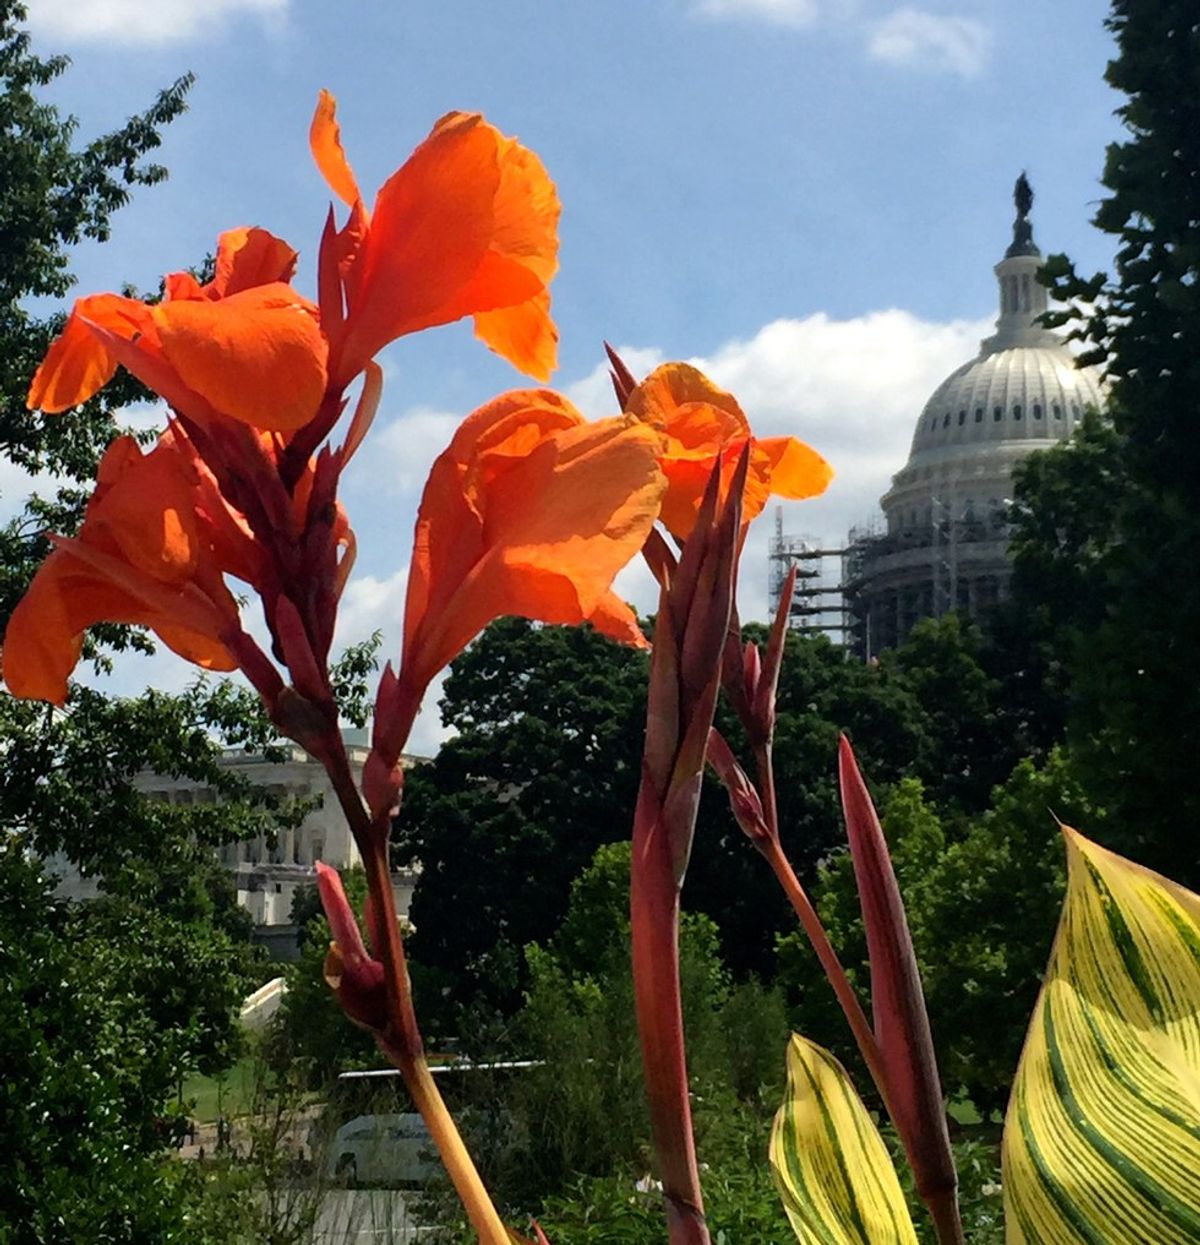 The U.S. Botanical Gardens: DC's Most Underrated Attraction